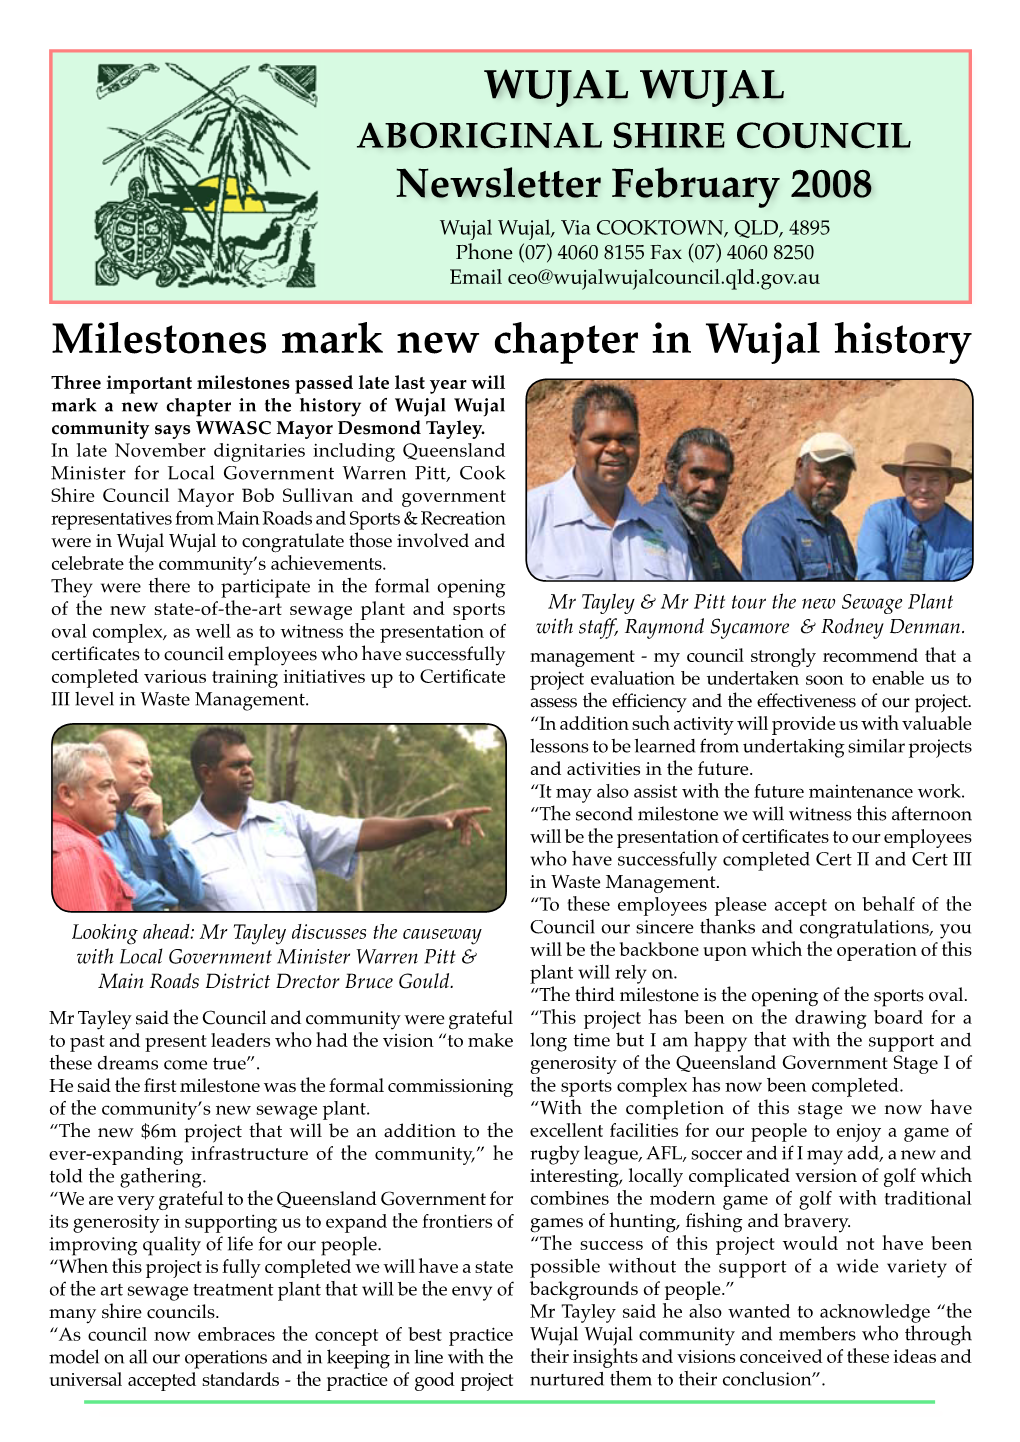 Milestones Mark New Chapter in Wujal History